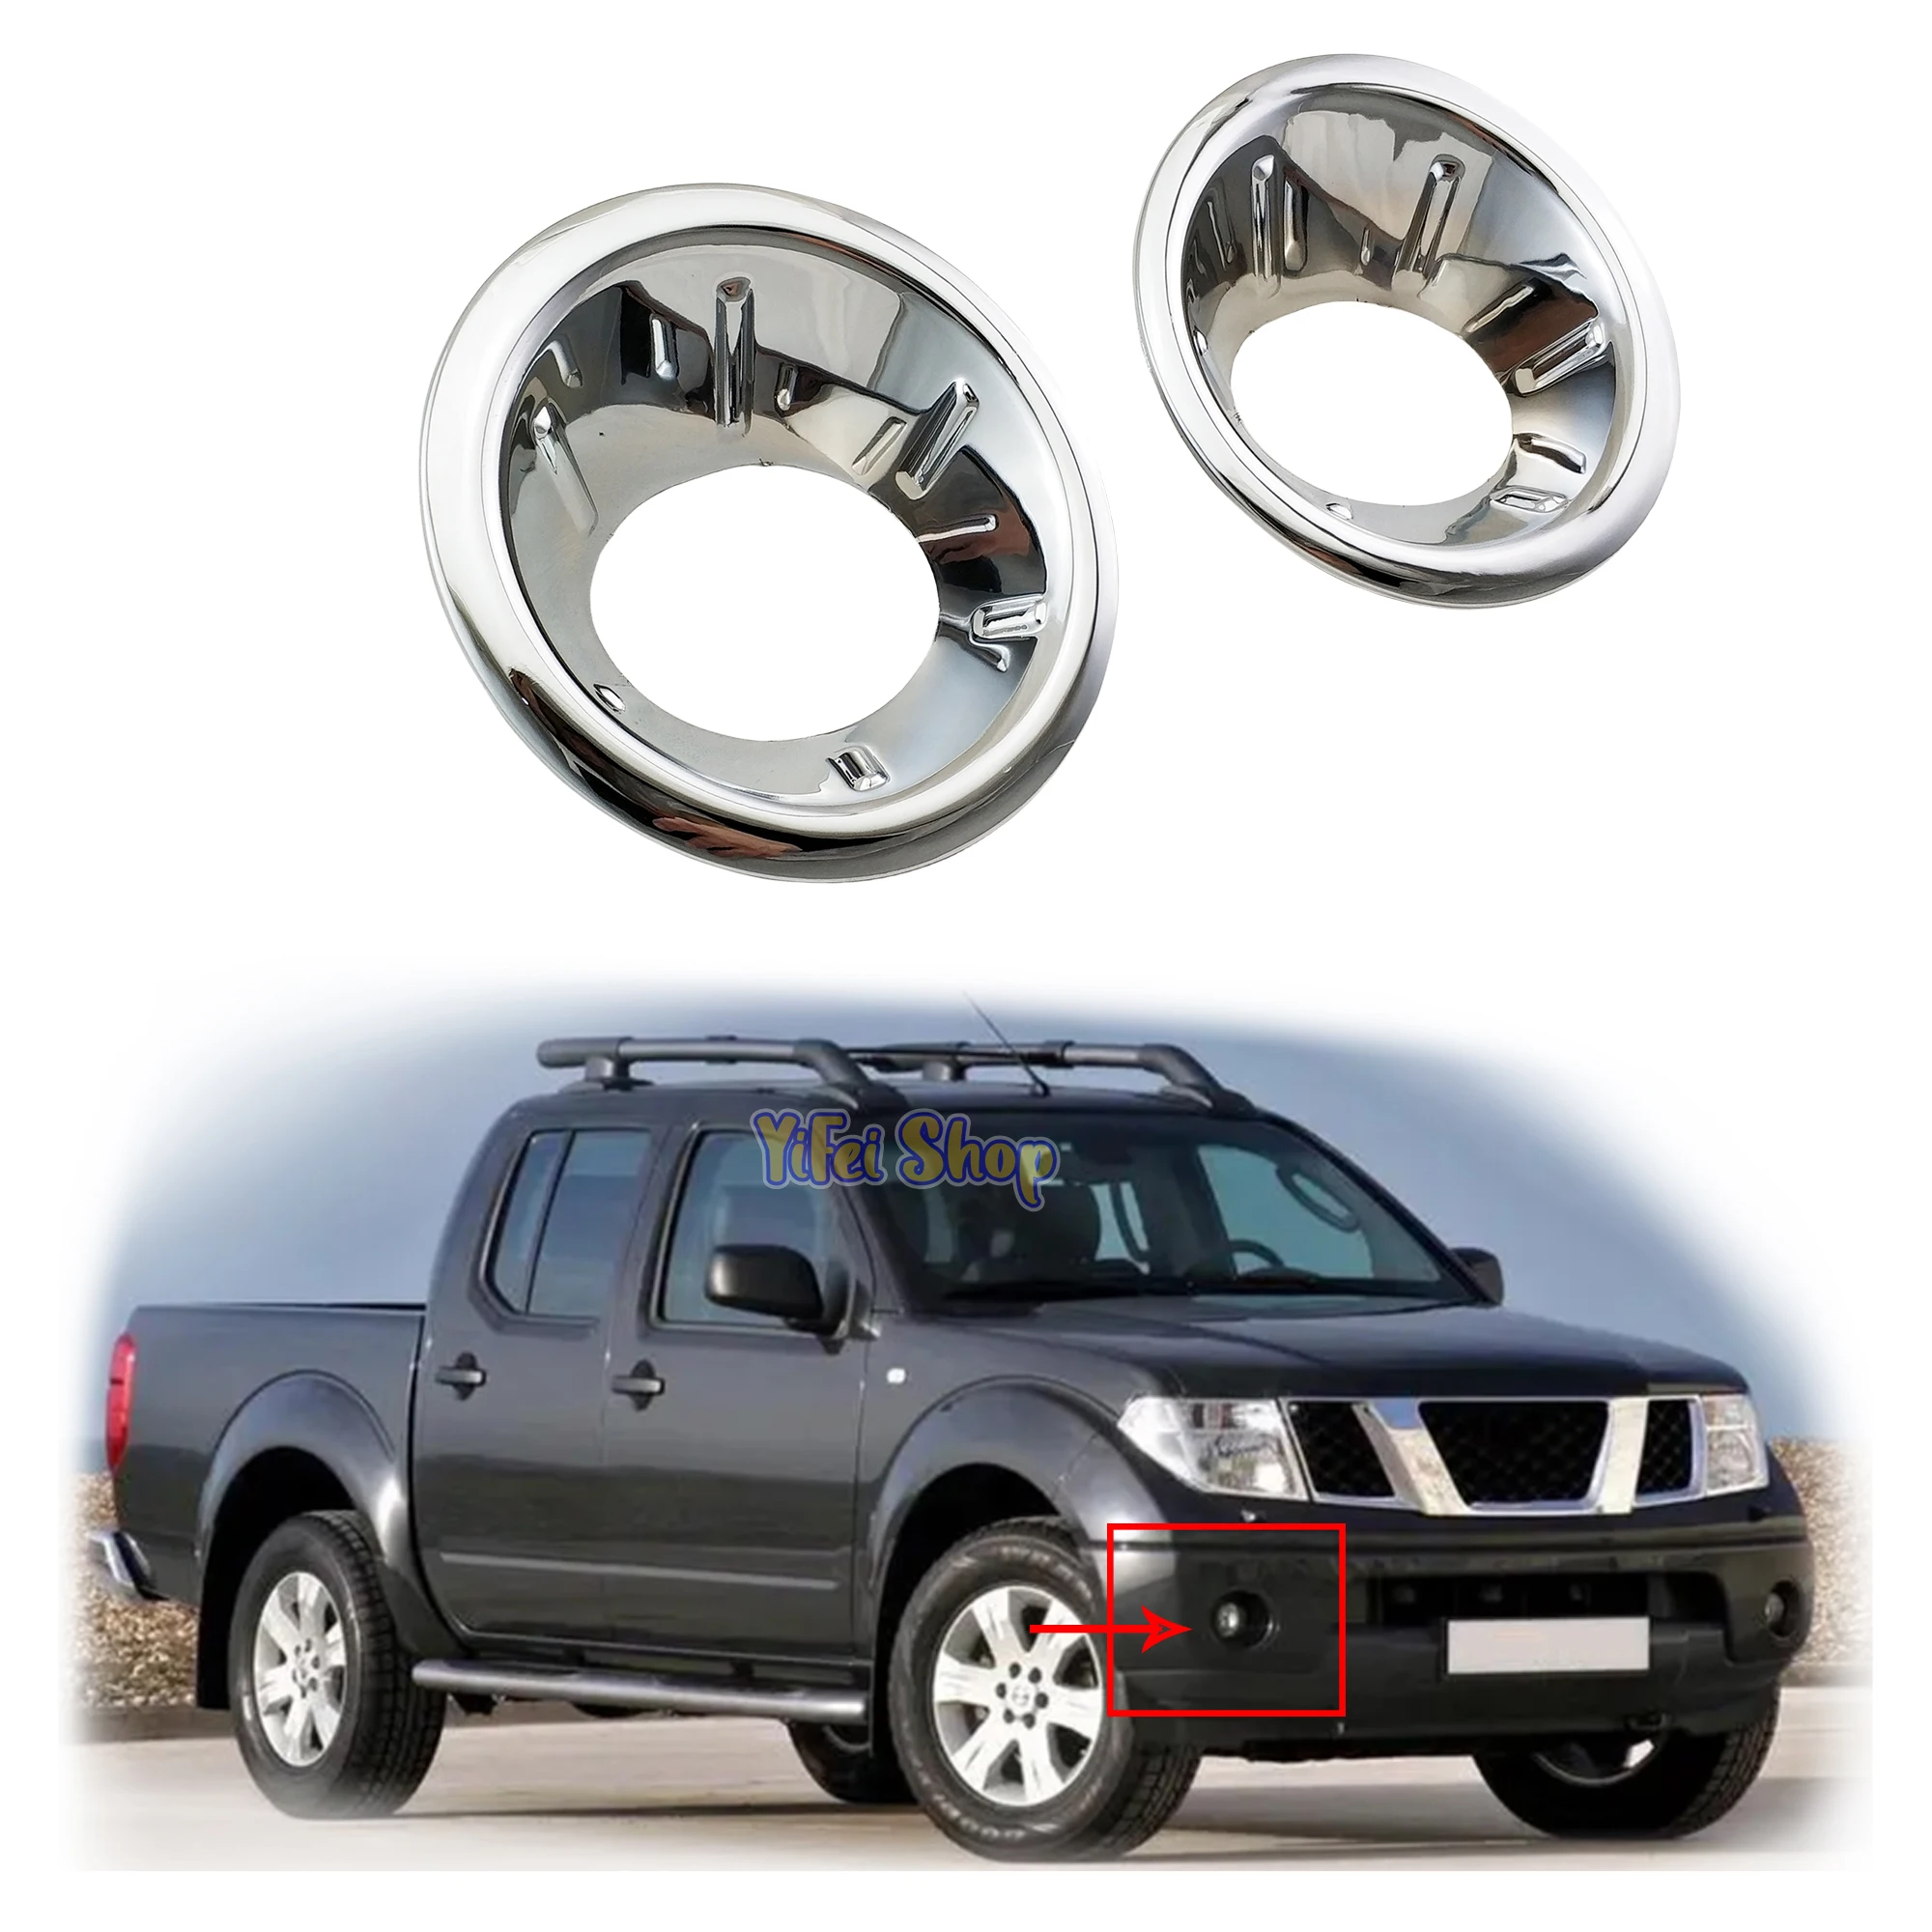 

New Car ABS Chrome Accessories Plated Front Fog Lamp Cover Trim Paste Style For Nissan Frontier Navara D40 2007 2008 2009 2010